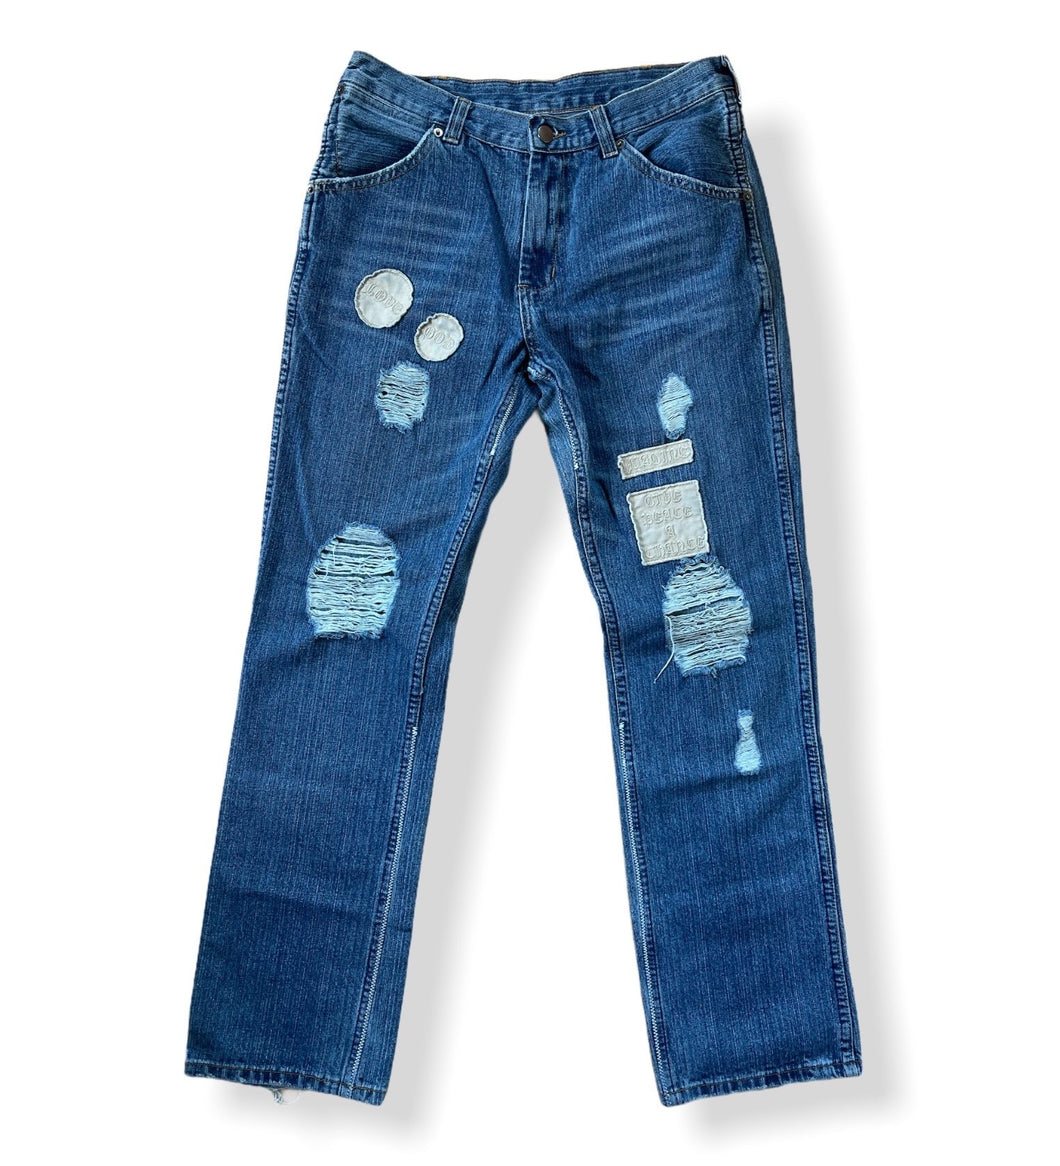 Give Peace A Chance Patched Denim